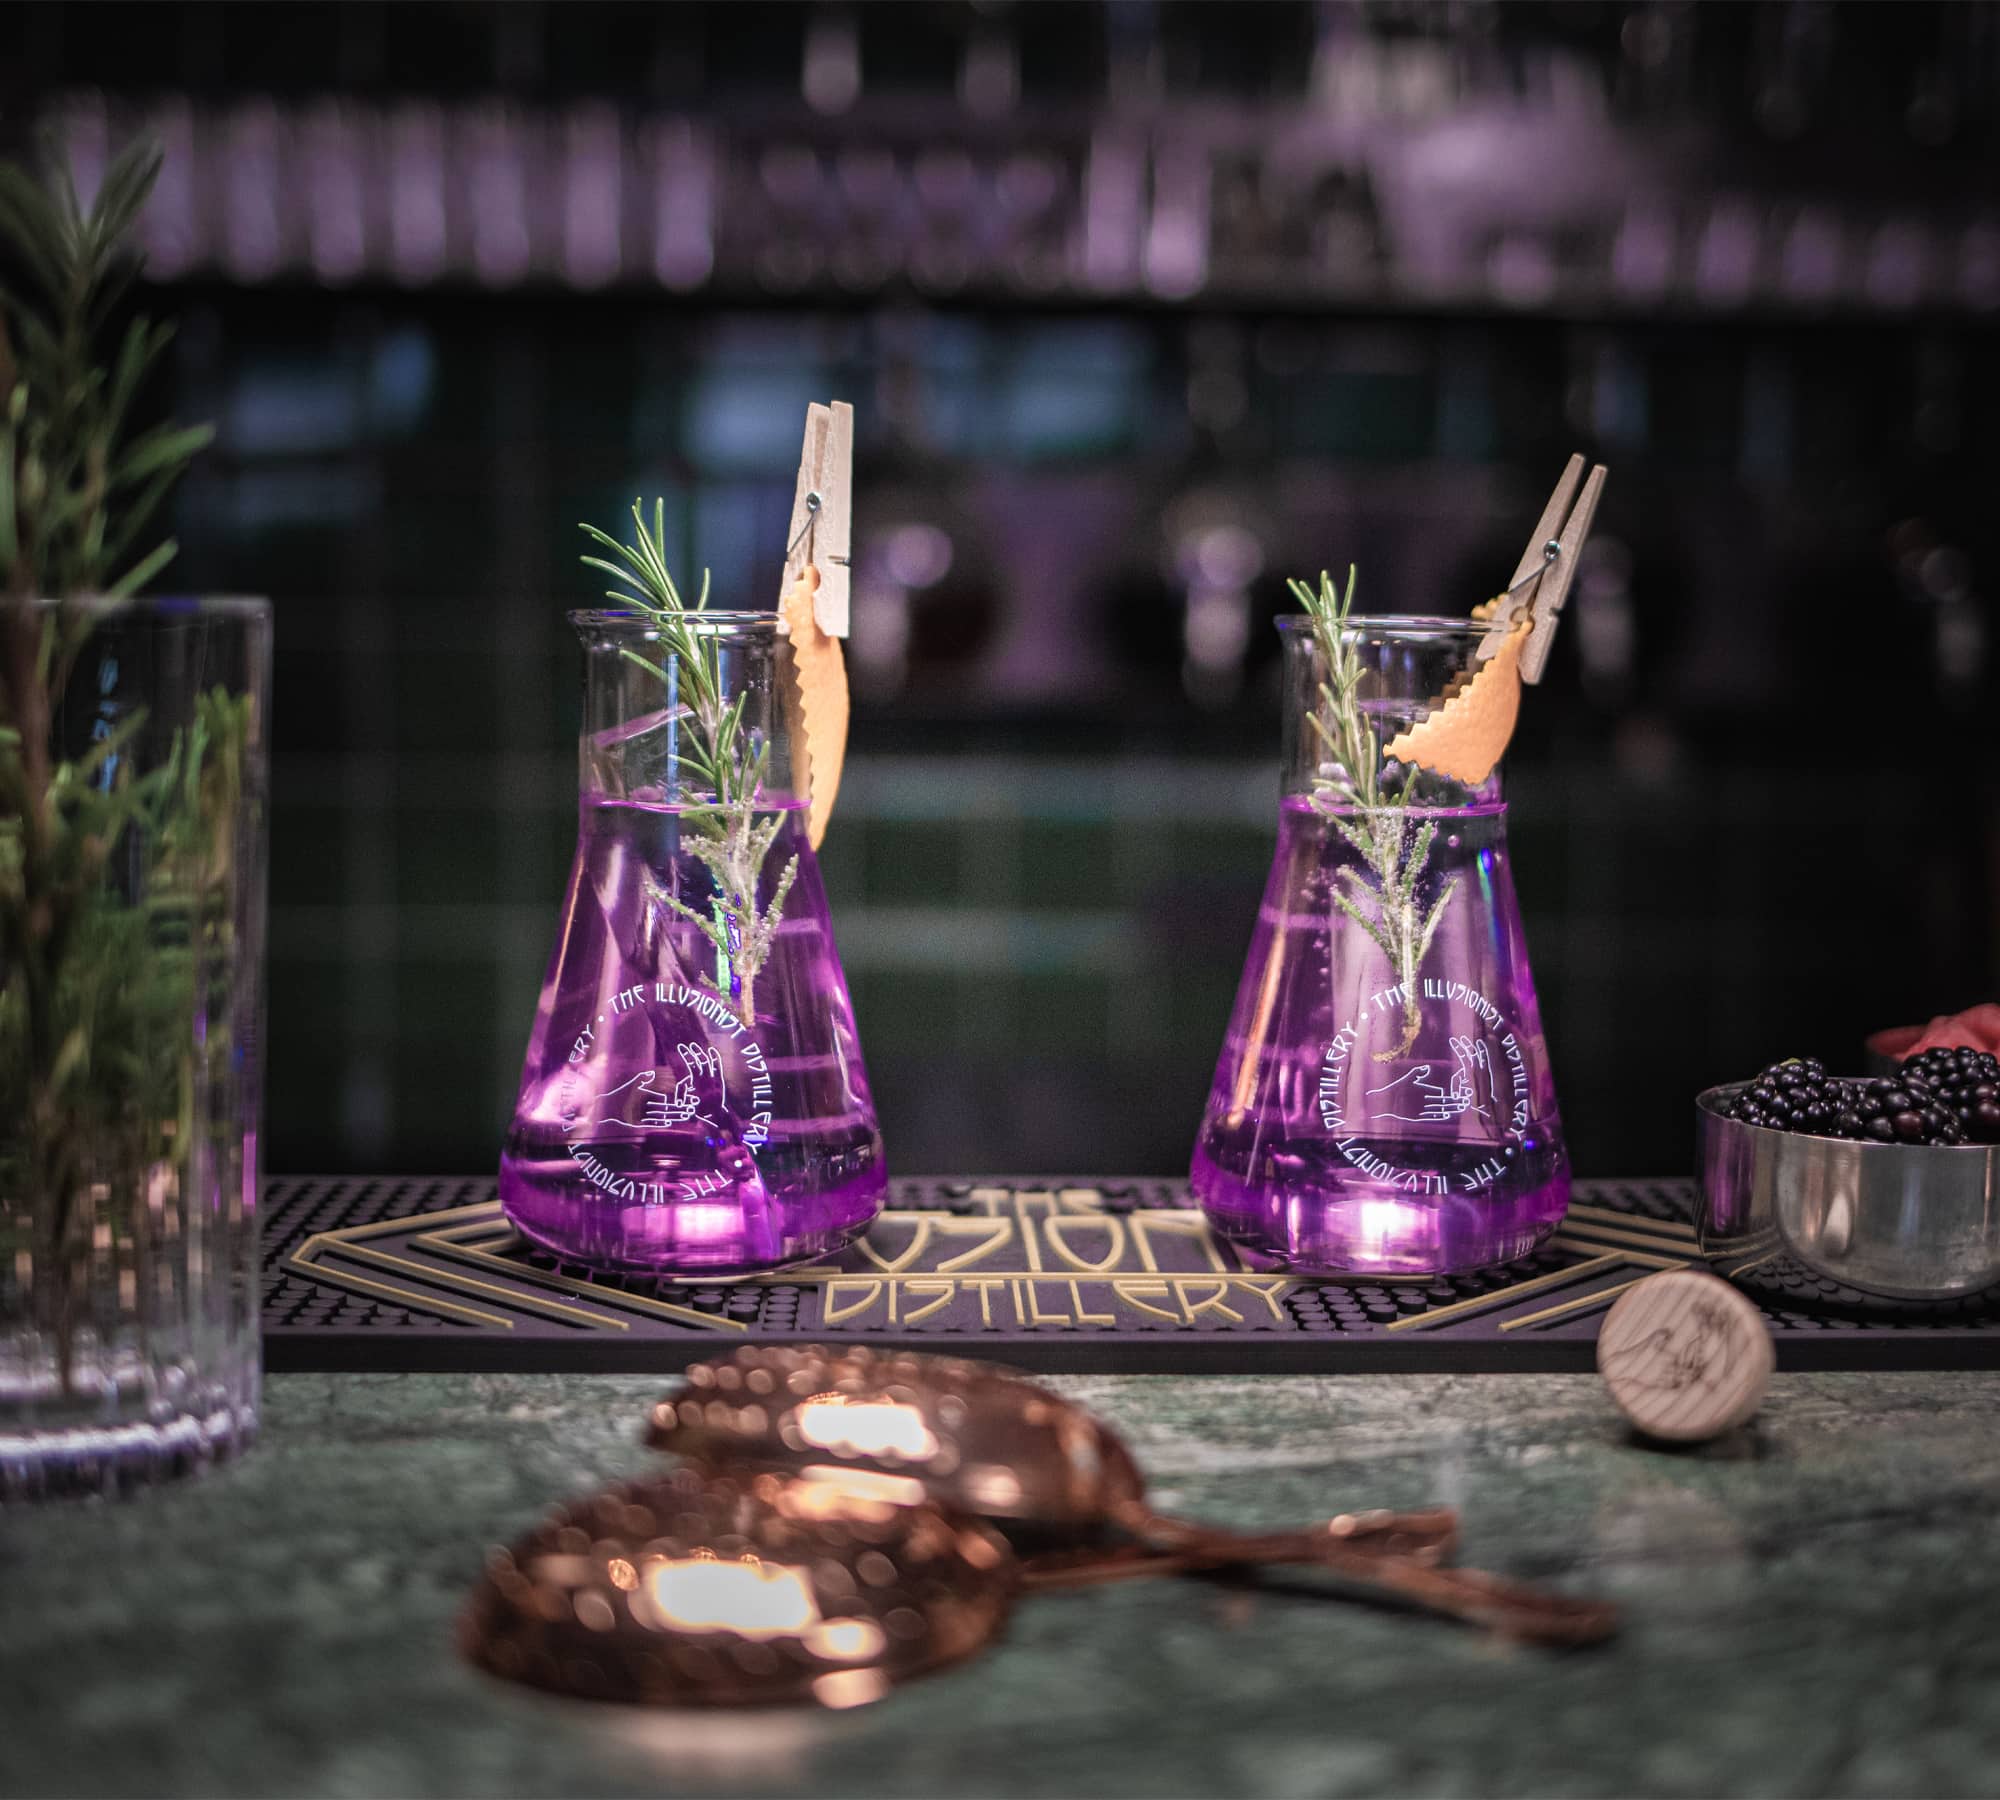 Focused photo on two served Illusionist Dry Gin glassware with purple gin.